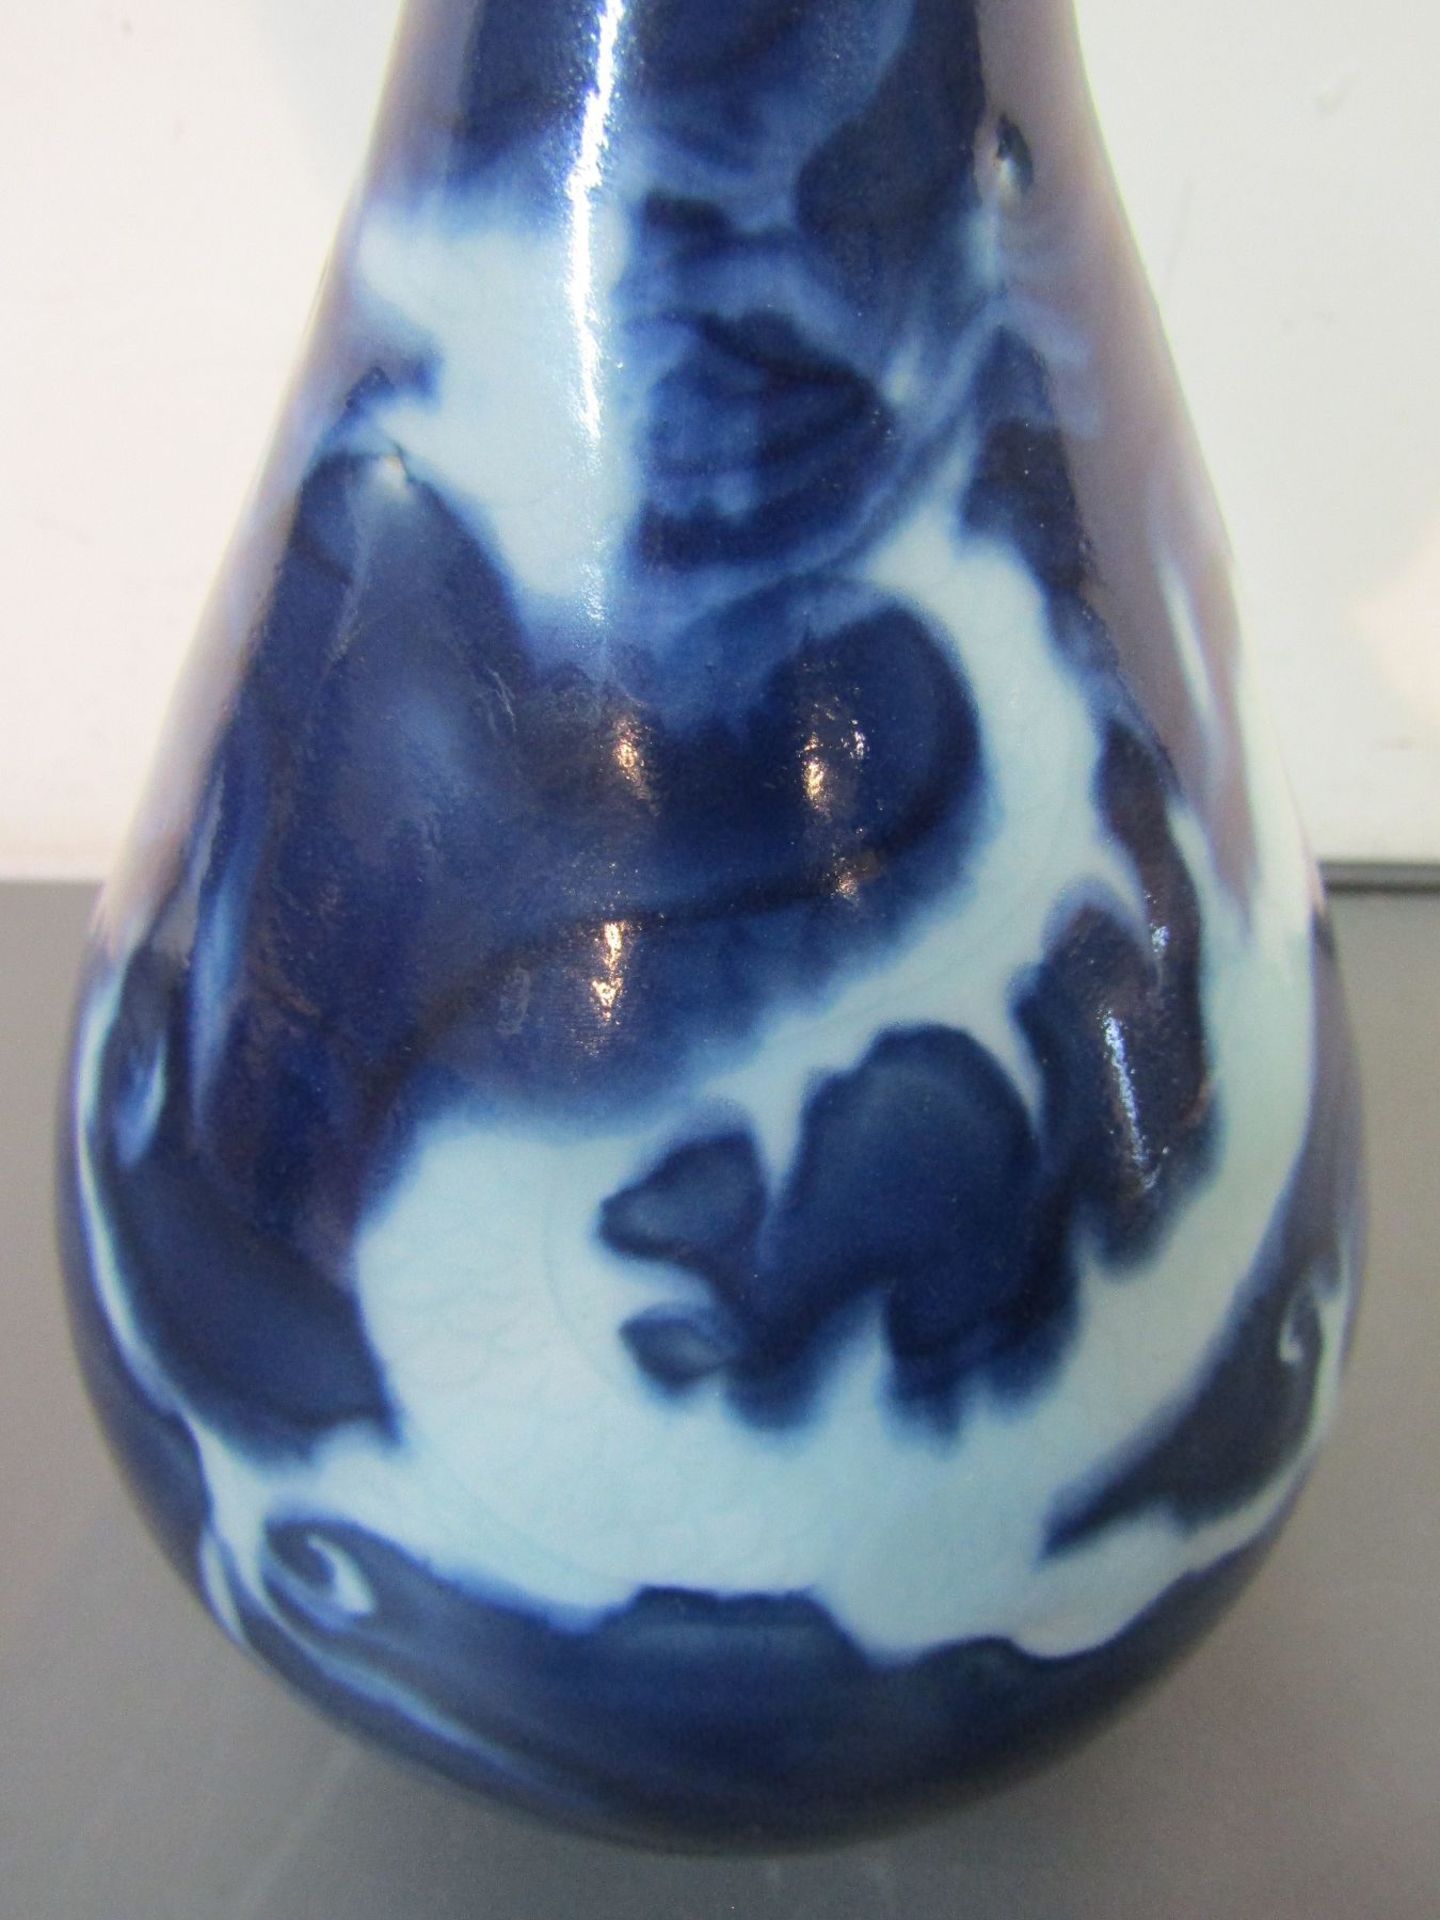 Baluster vase, China 18. th c., Transitional period between Ching and Ming, porcelain continuous - Bild 10 aus 10